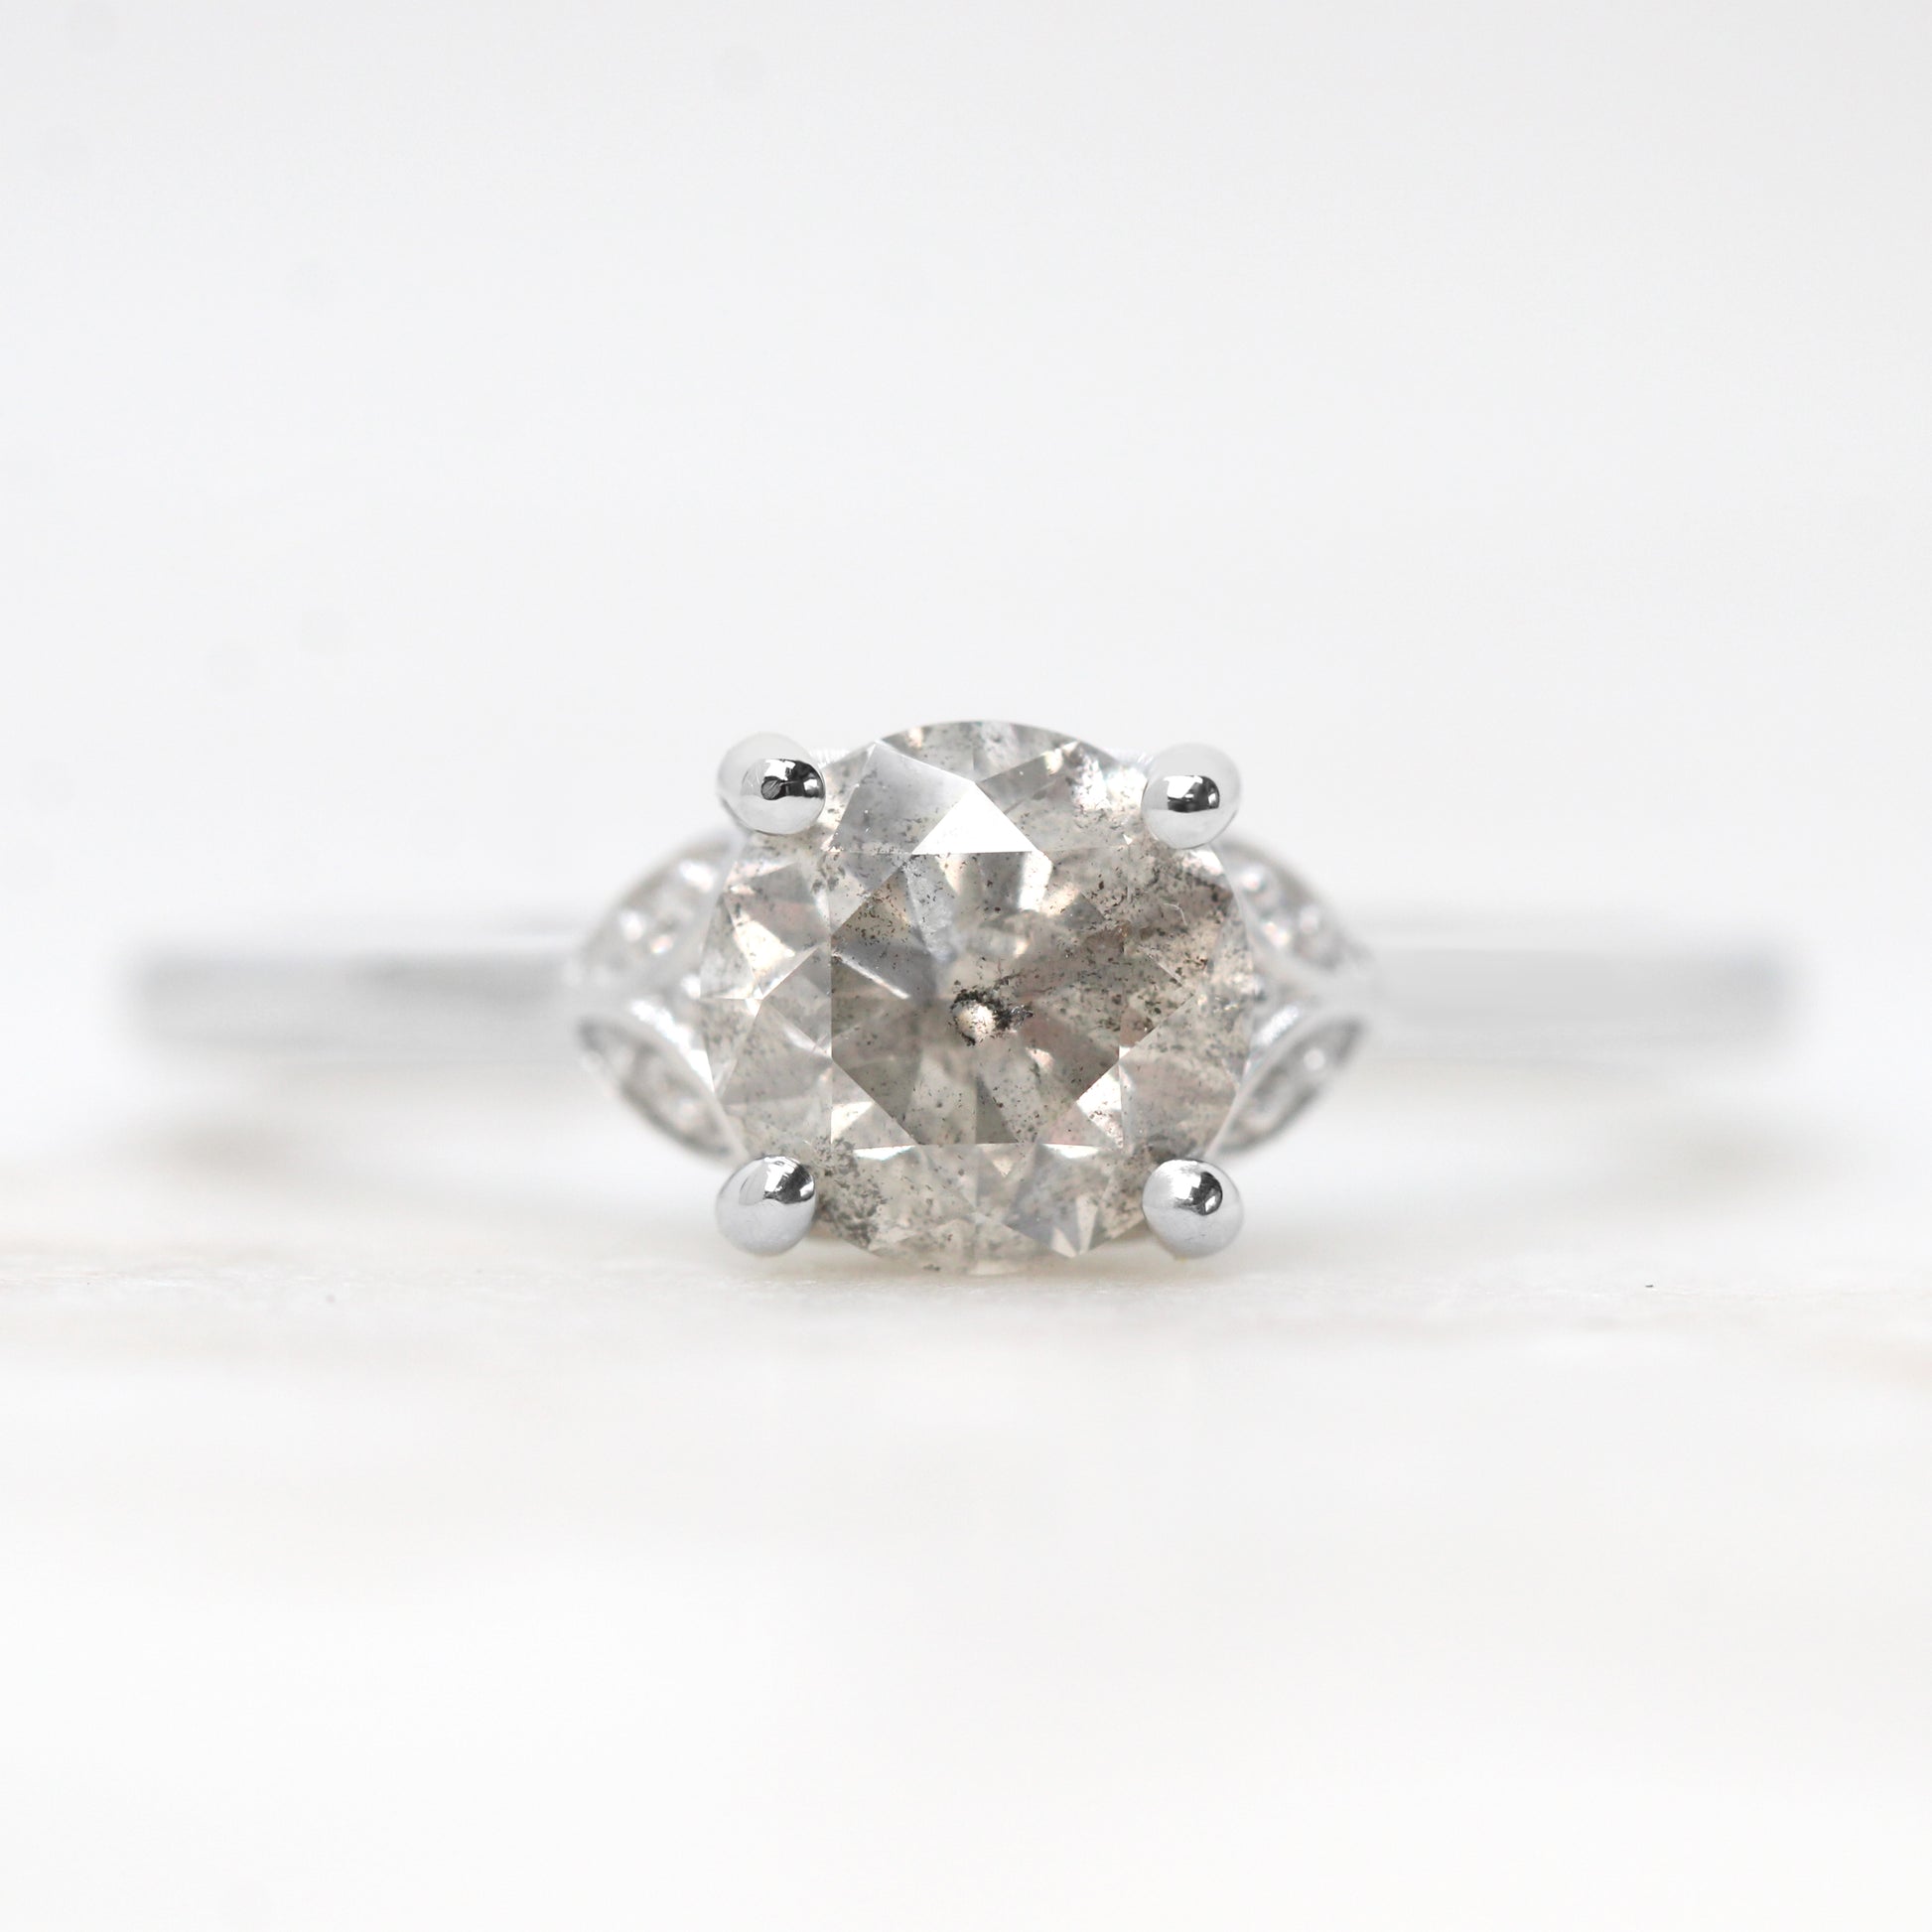 Cecelia Ring with a 1.26 Carat Round Bright Gray Celestial Diamond and White Accent Diamonds in 14k White Gold - Ready to Size and Ship - Midwinter Co. Alternative Bridal Rings and Modern Fine Jewelry